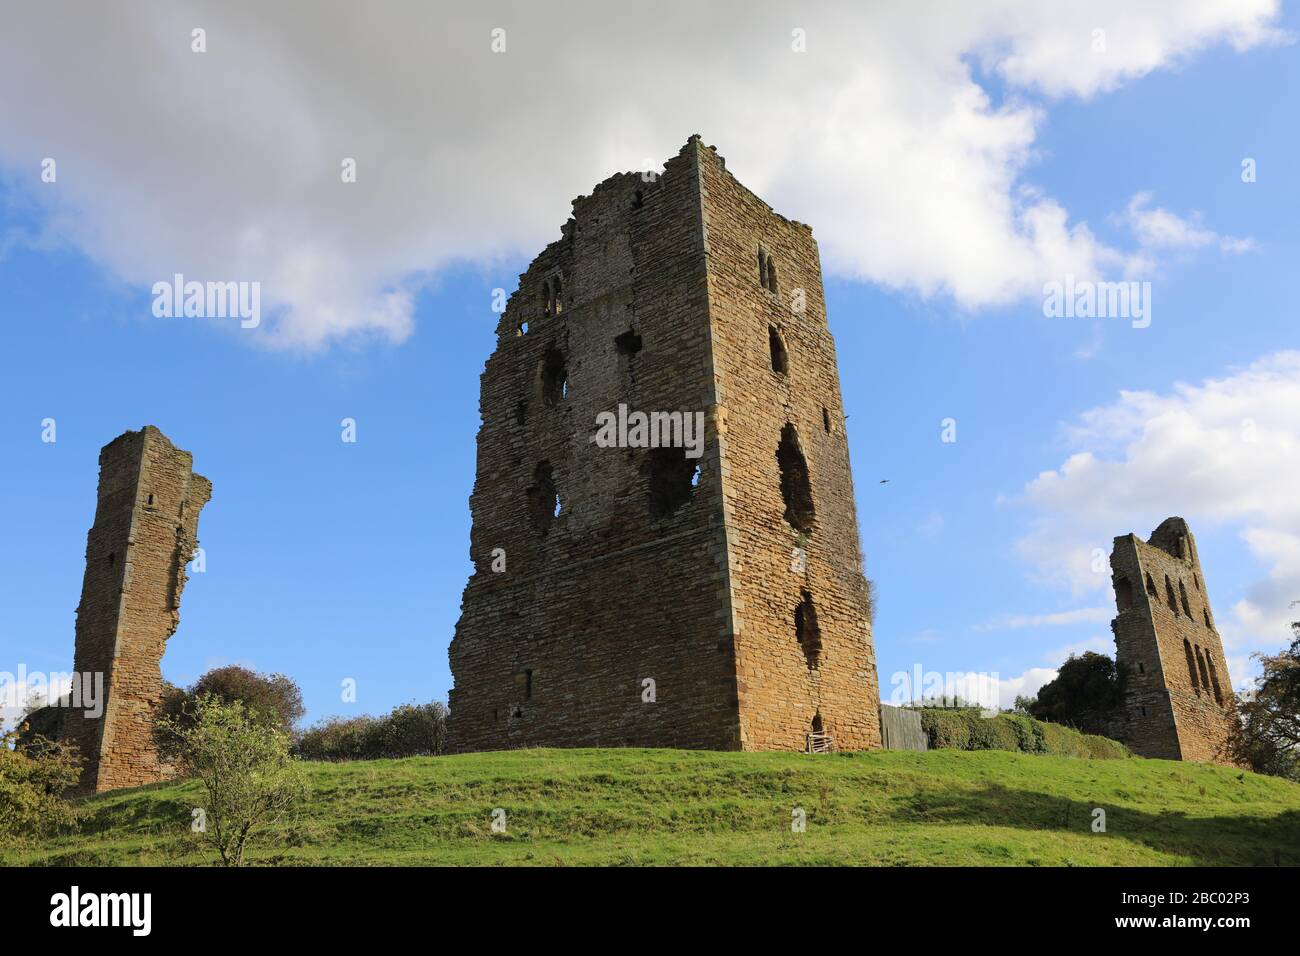 Sherrif Hutton Castle, Ryedale, North Yorkshire. Built 1382-1398 by John Neville. Richard III married Anne Neville. Council of the North held here. Stock Photo